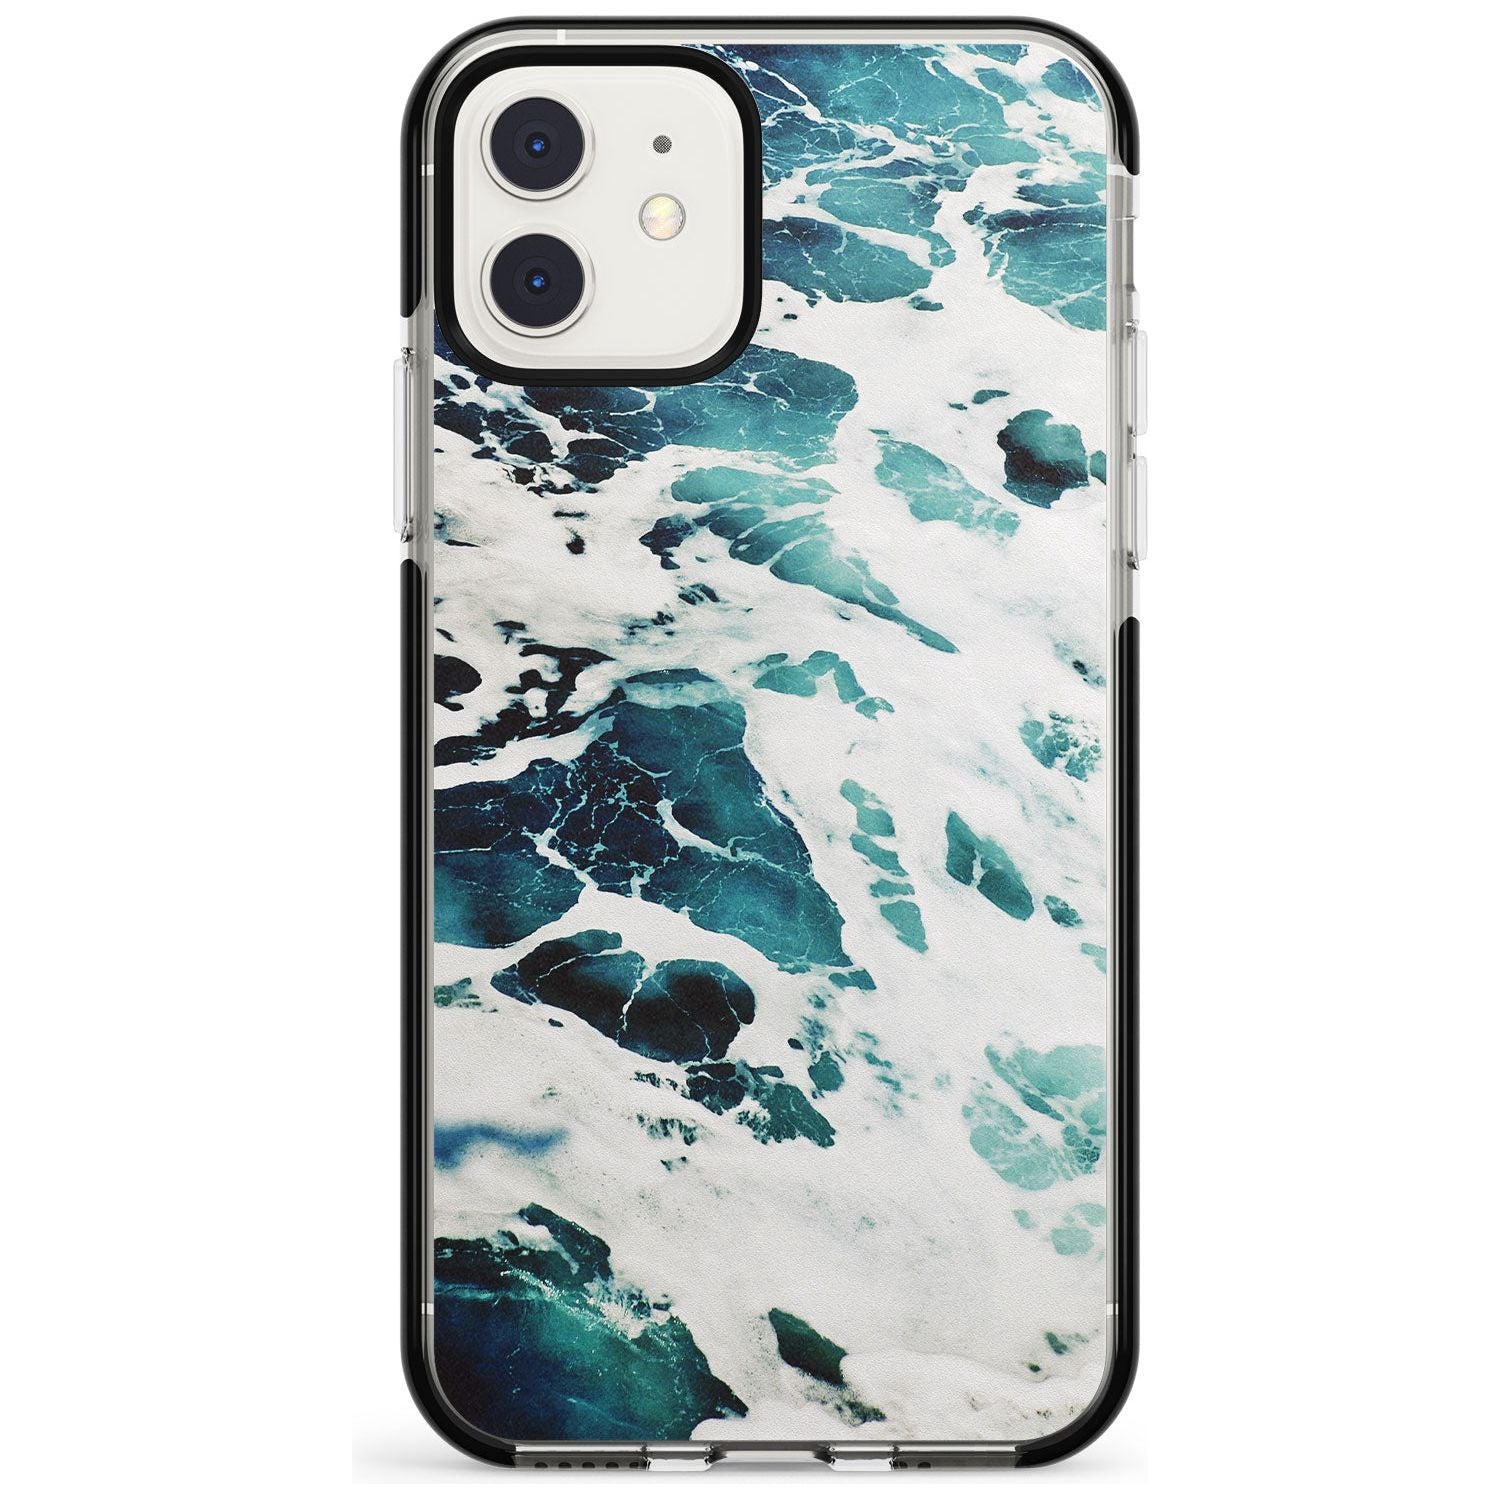 Ocean Waves Photograph Black Impact Phone Case for iPhone 11